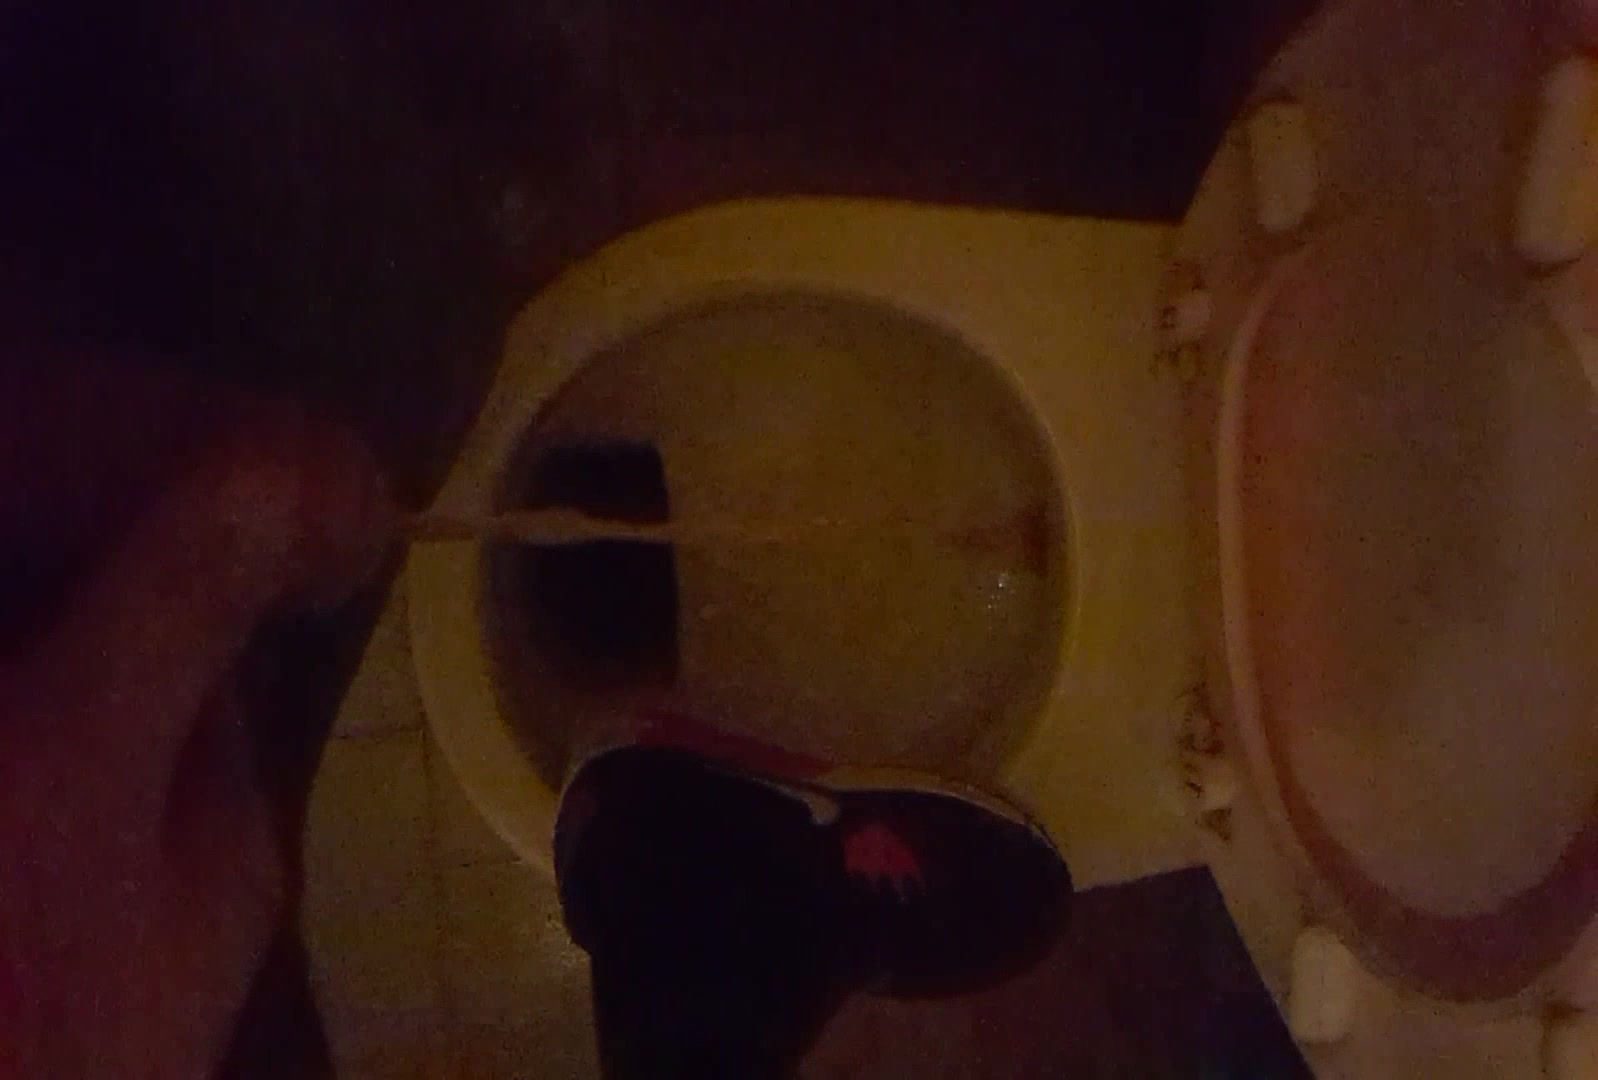 Me pissing - video 15